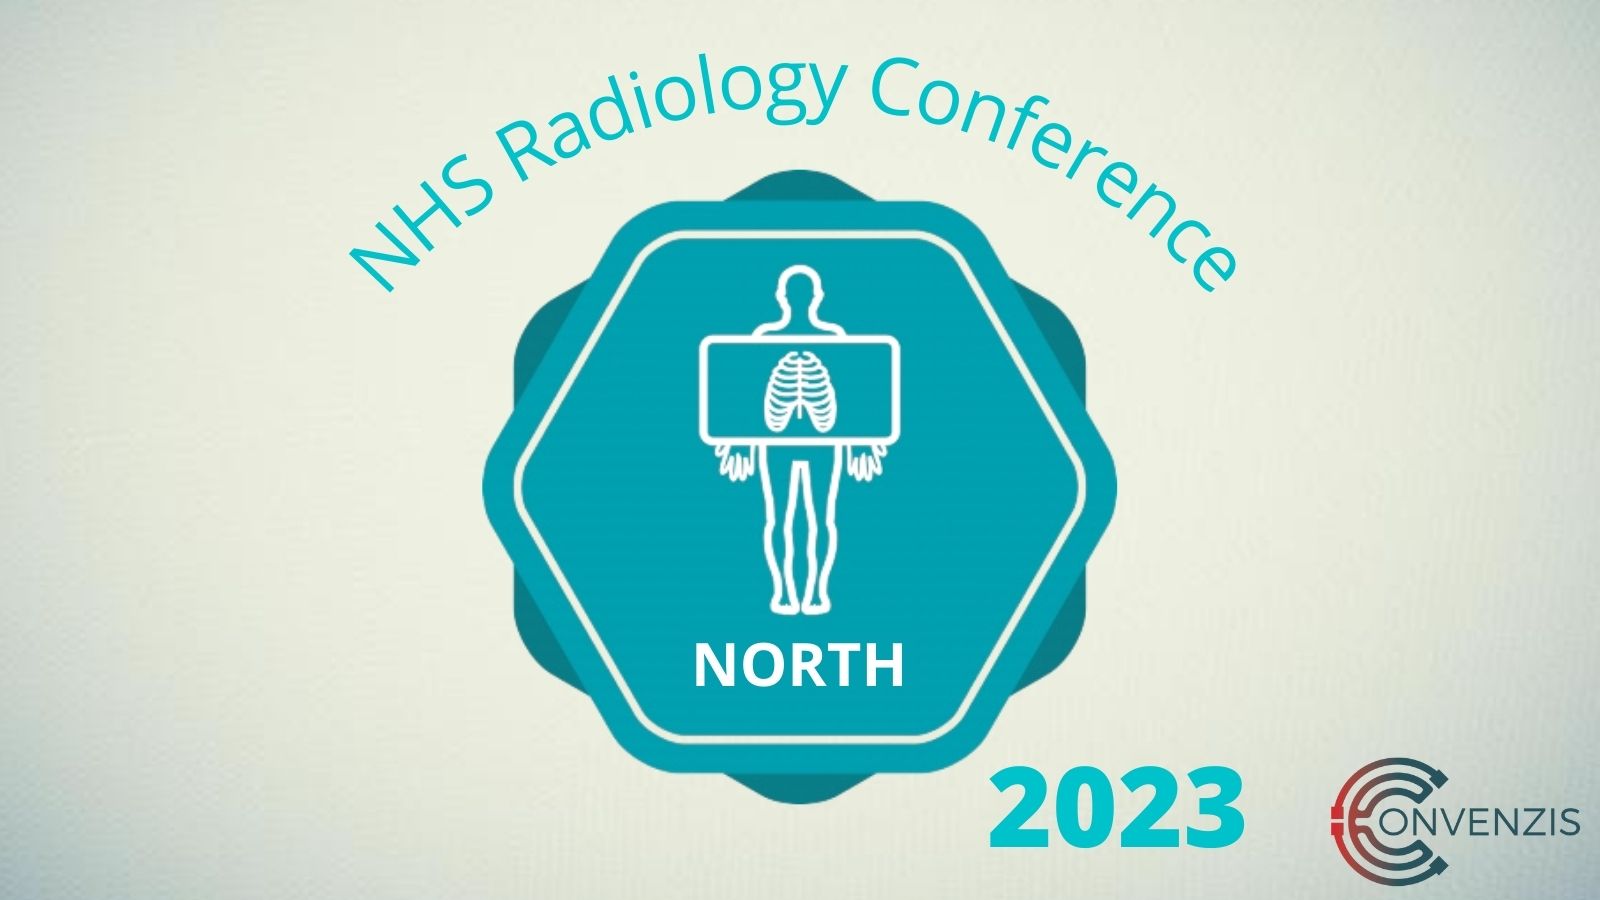 Convenzis Event The NHS Radiology Conference North 2023